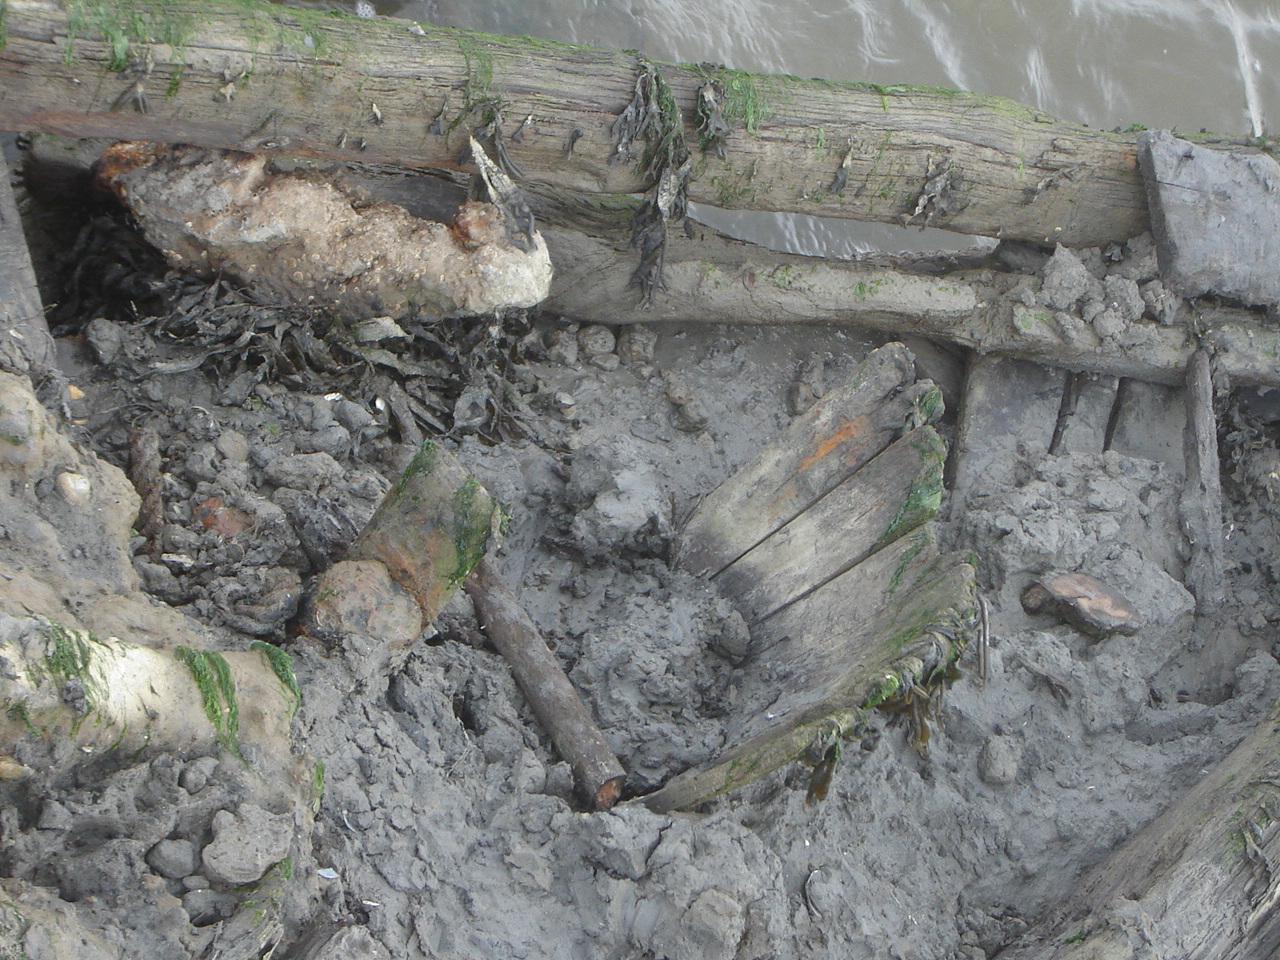 Remains of the wooden bucket (October 2013)